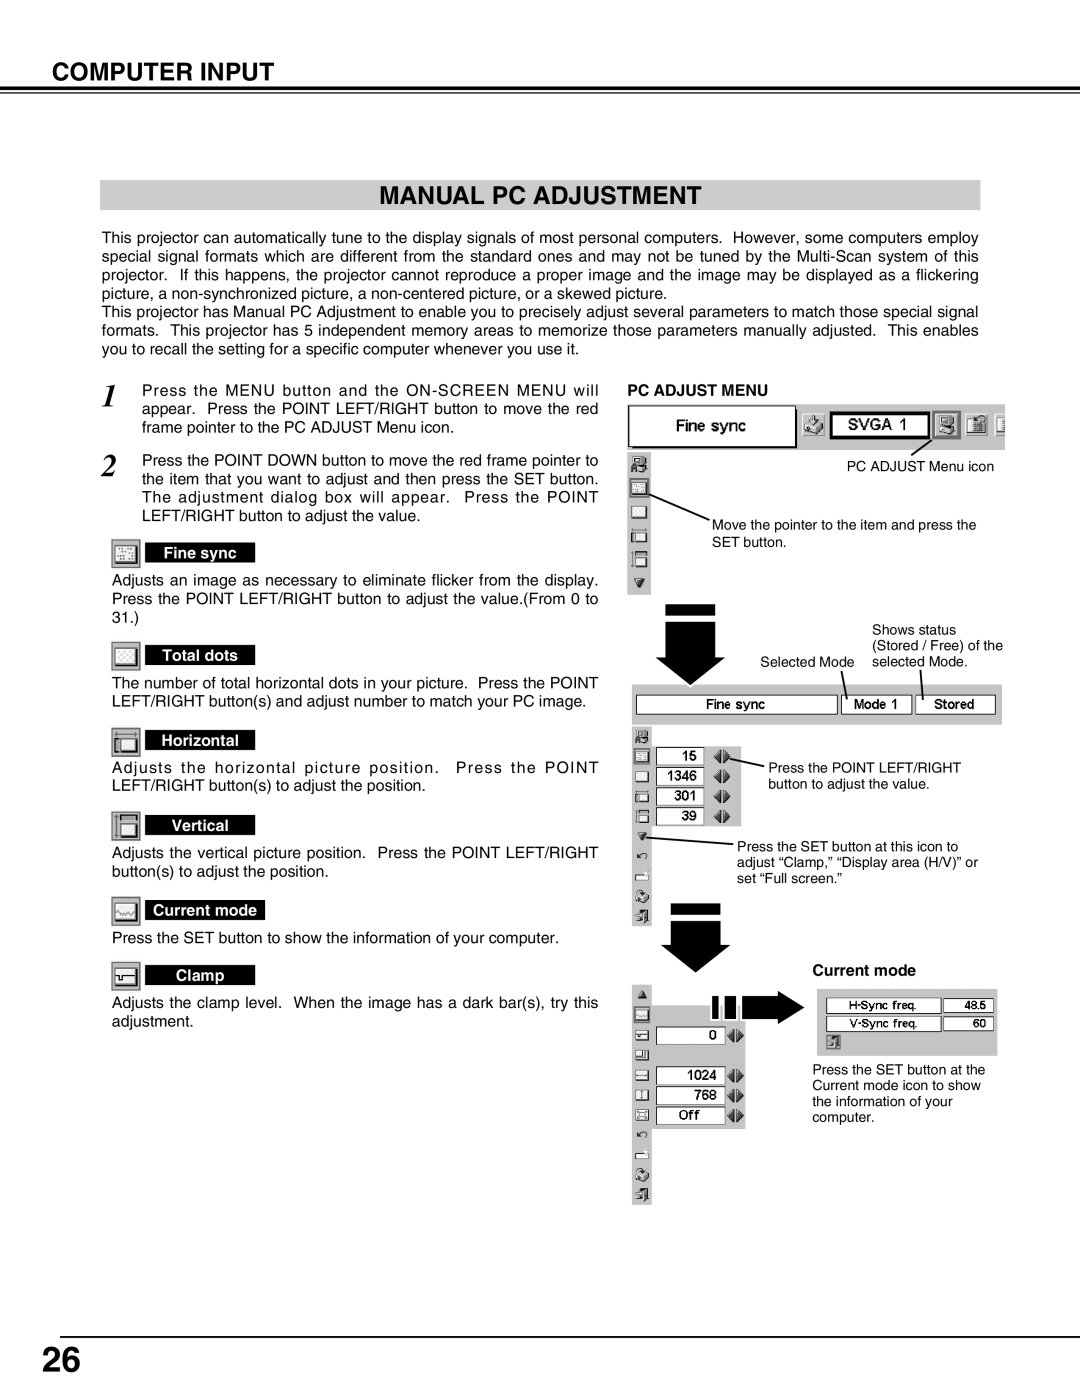 Canon LV-5200 Computer Input Manual Pc Adjustment, Fine sync, Total dots, Horizontal, Vertical, Current mode, Clamp 